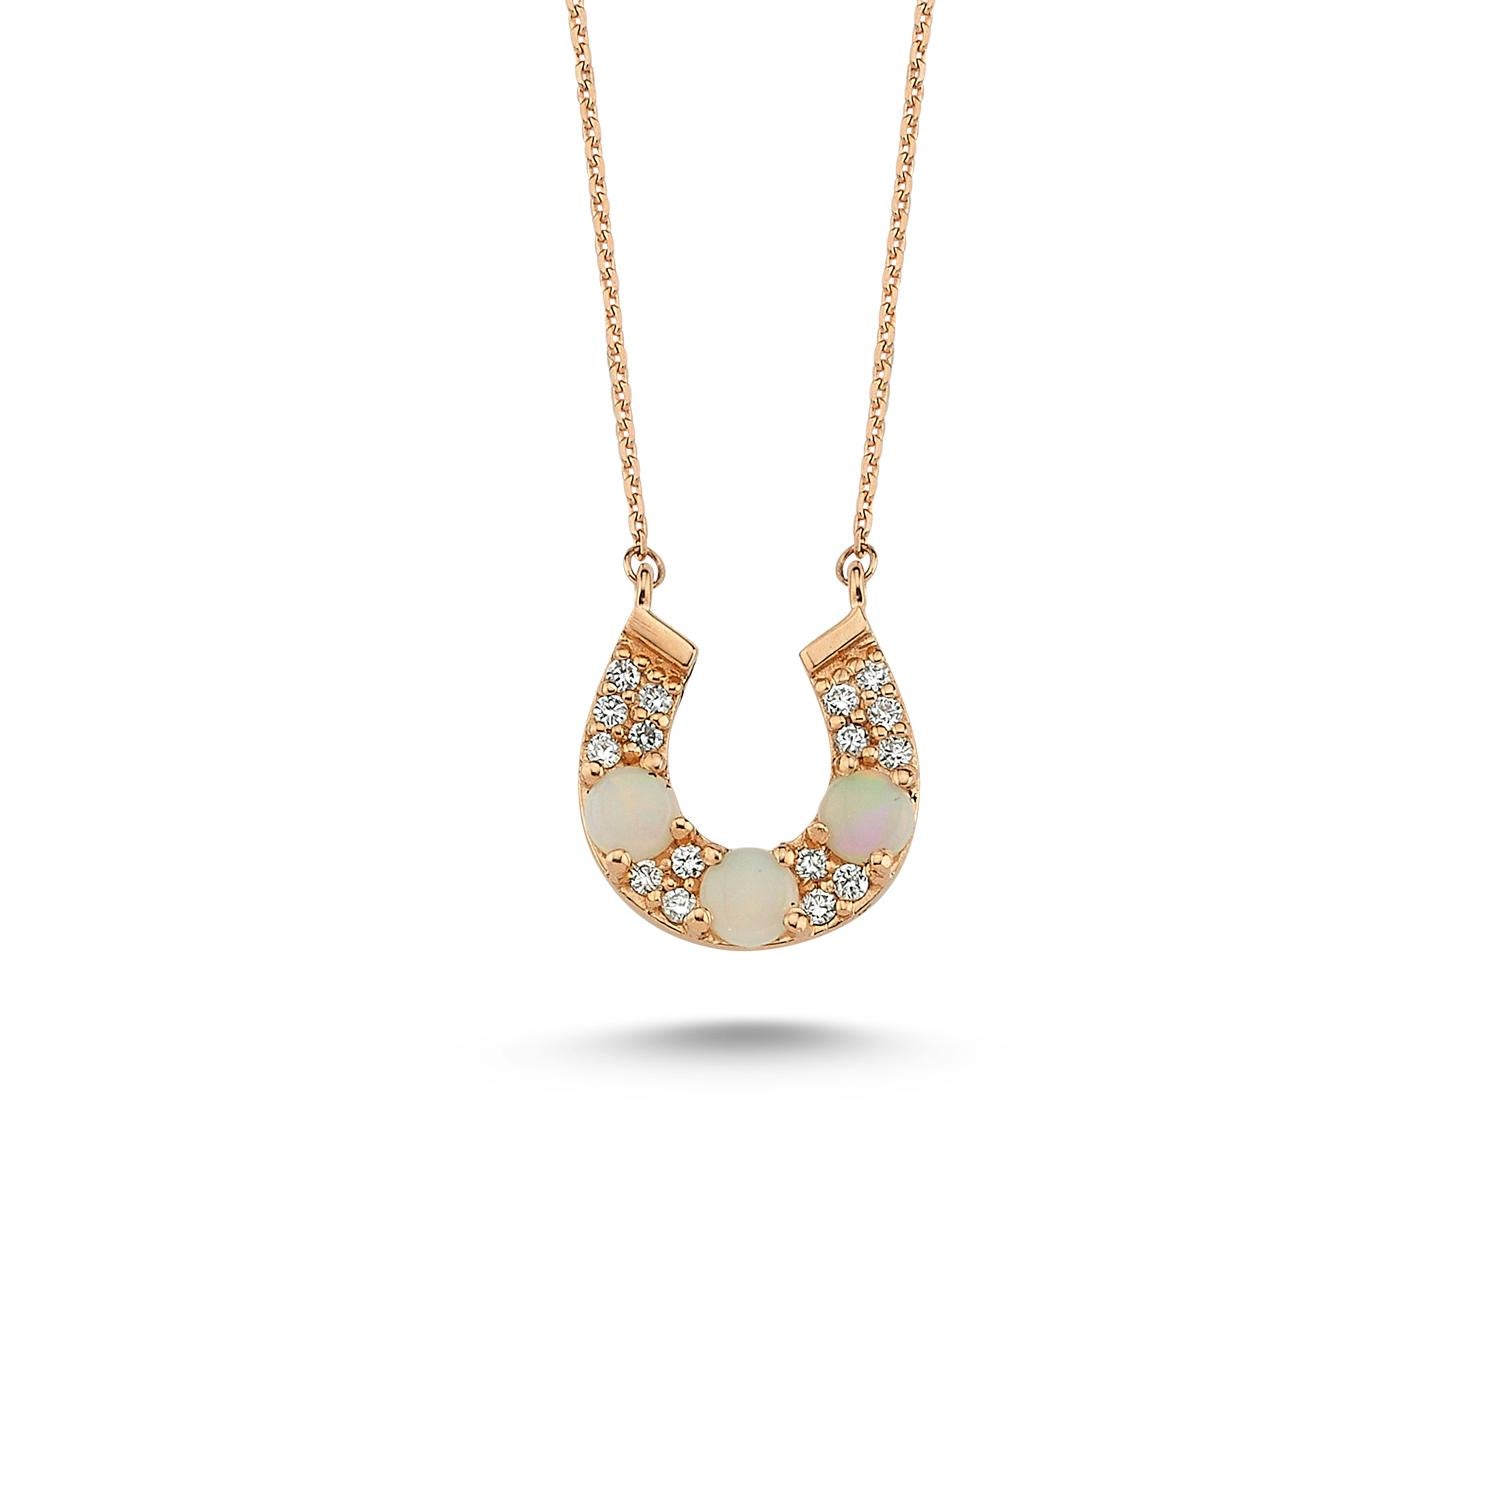 Horseshoe necklace in 14k rose gold with 0.09ct white diamond by Selda Jewellery

Additional Information:-
Collection: Art of giving collection
14K Rose gold
0.09ct White diamond
White opal
Pendant height 1cm
Chain length 42cm